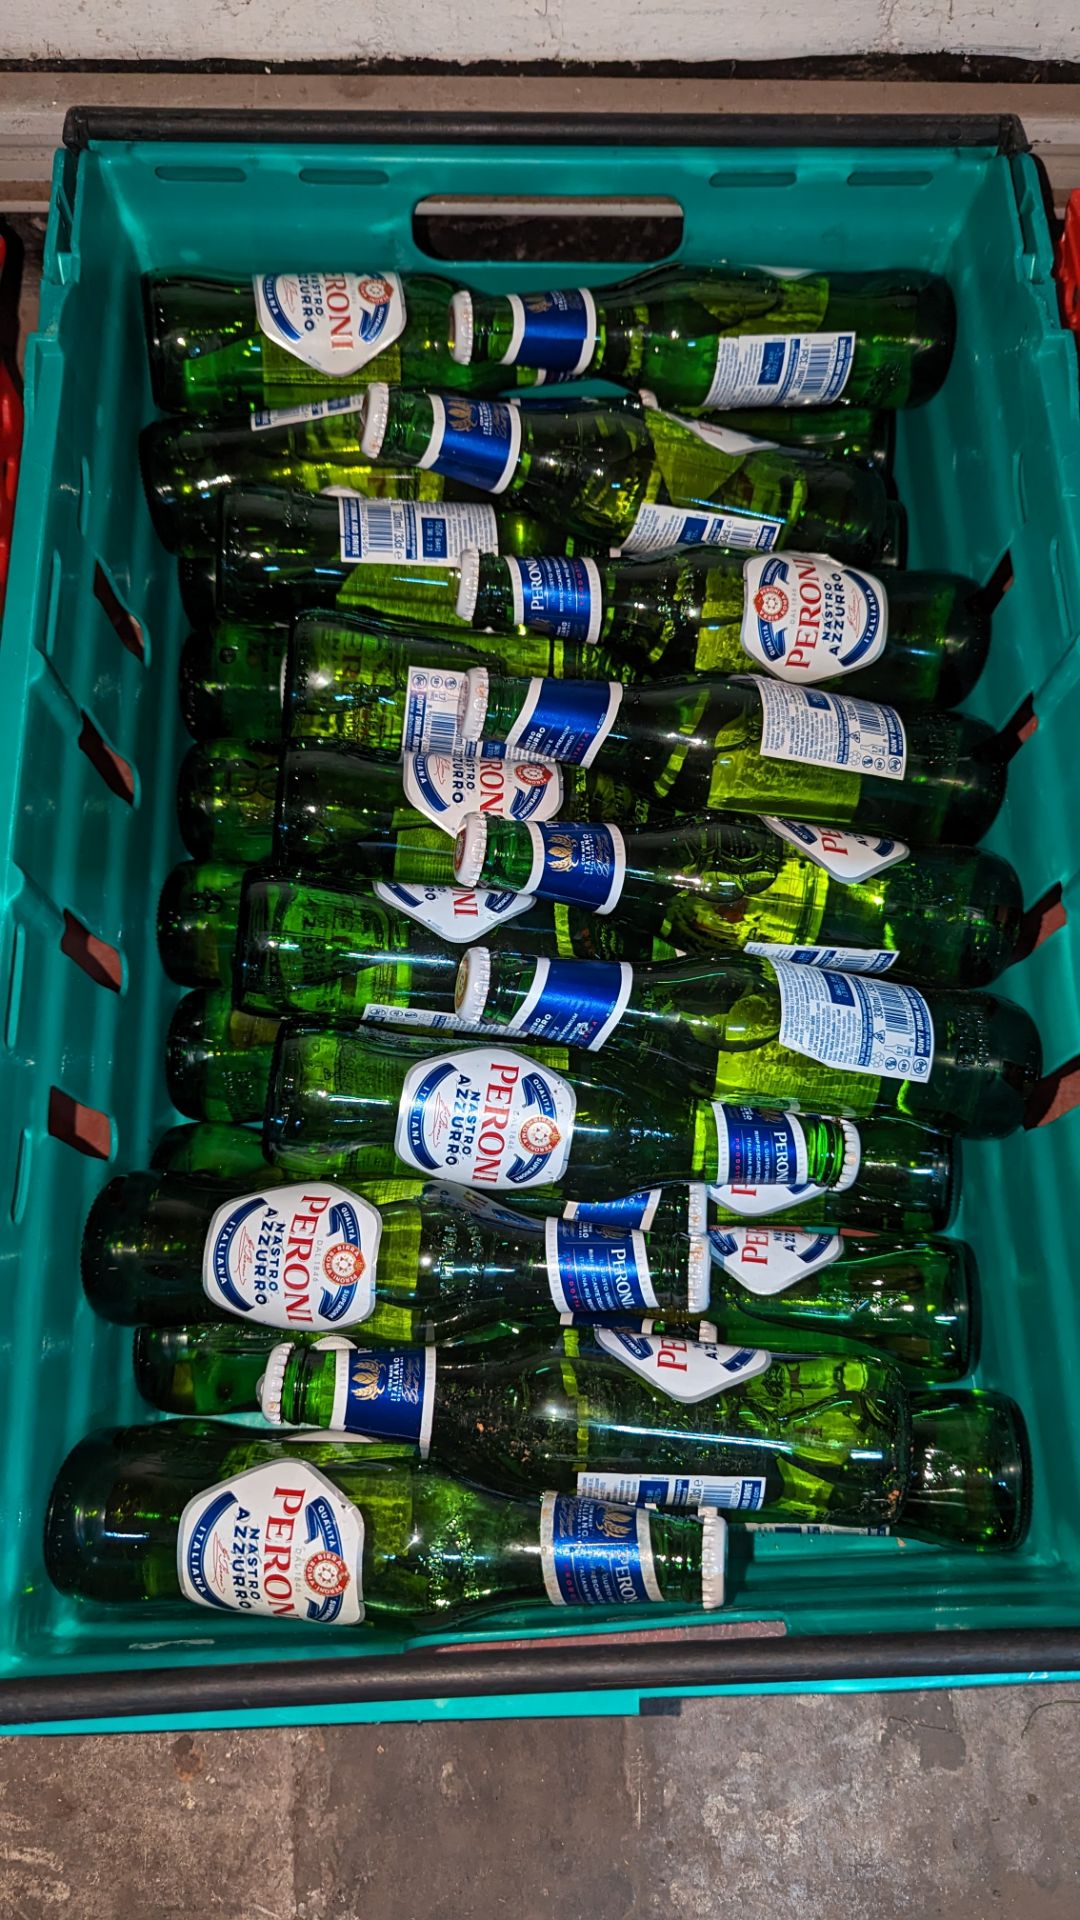 68 bottles of Peroni Nastro Azzurro beer (in 3 crates) sold under AWRS number XQAW00000101017 - Image 5 of 6